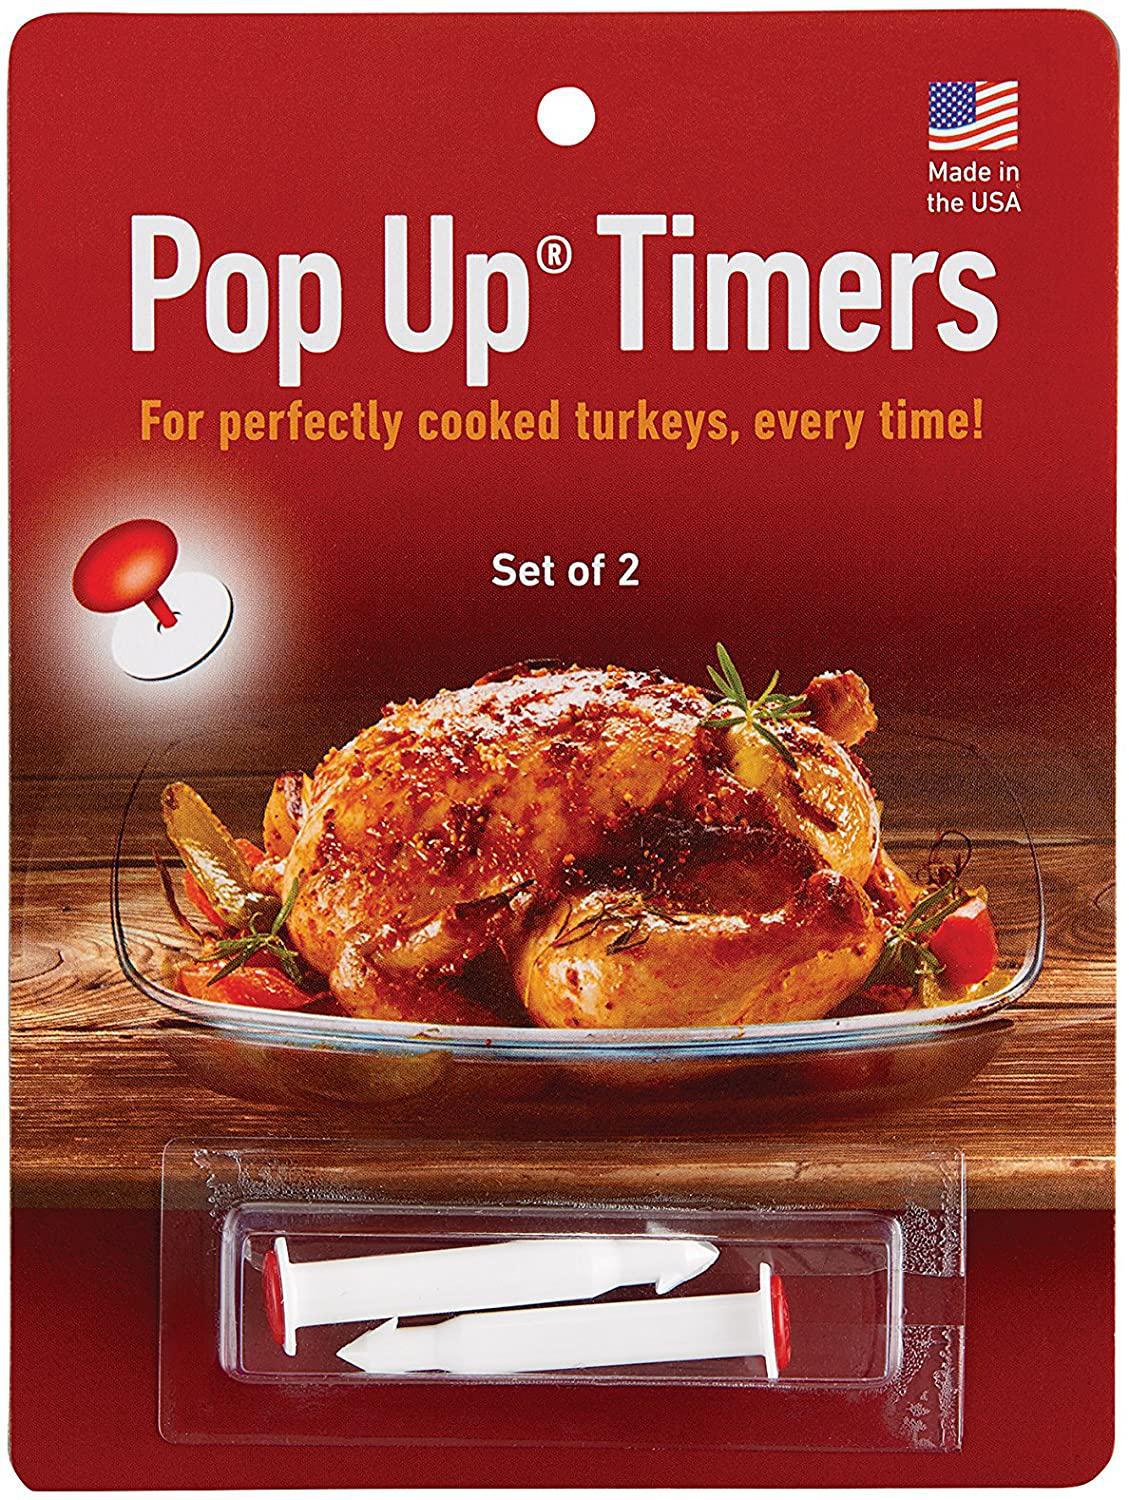 Do popup thermometers work best if the turkey is cooked at a low